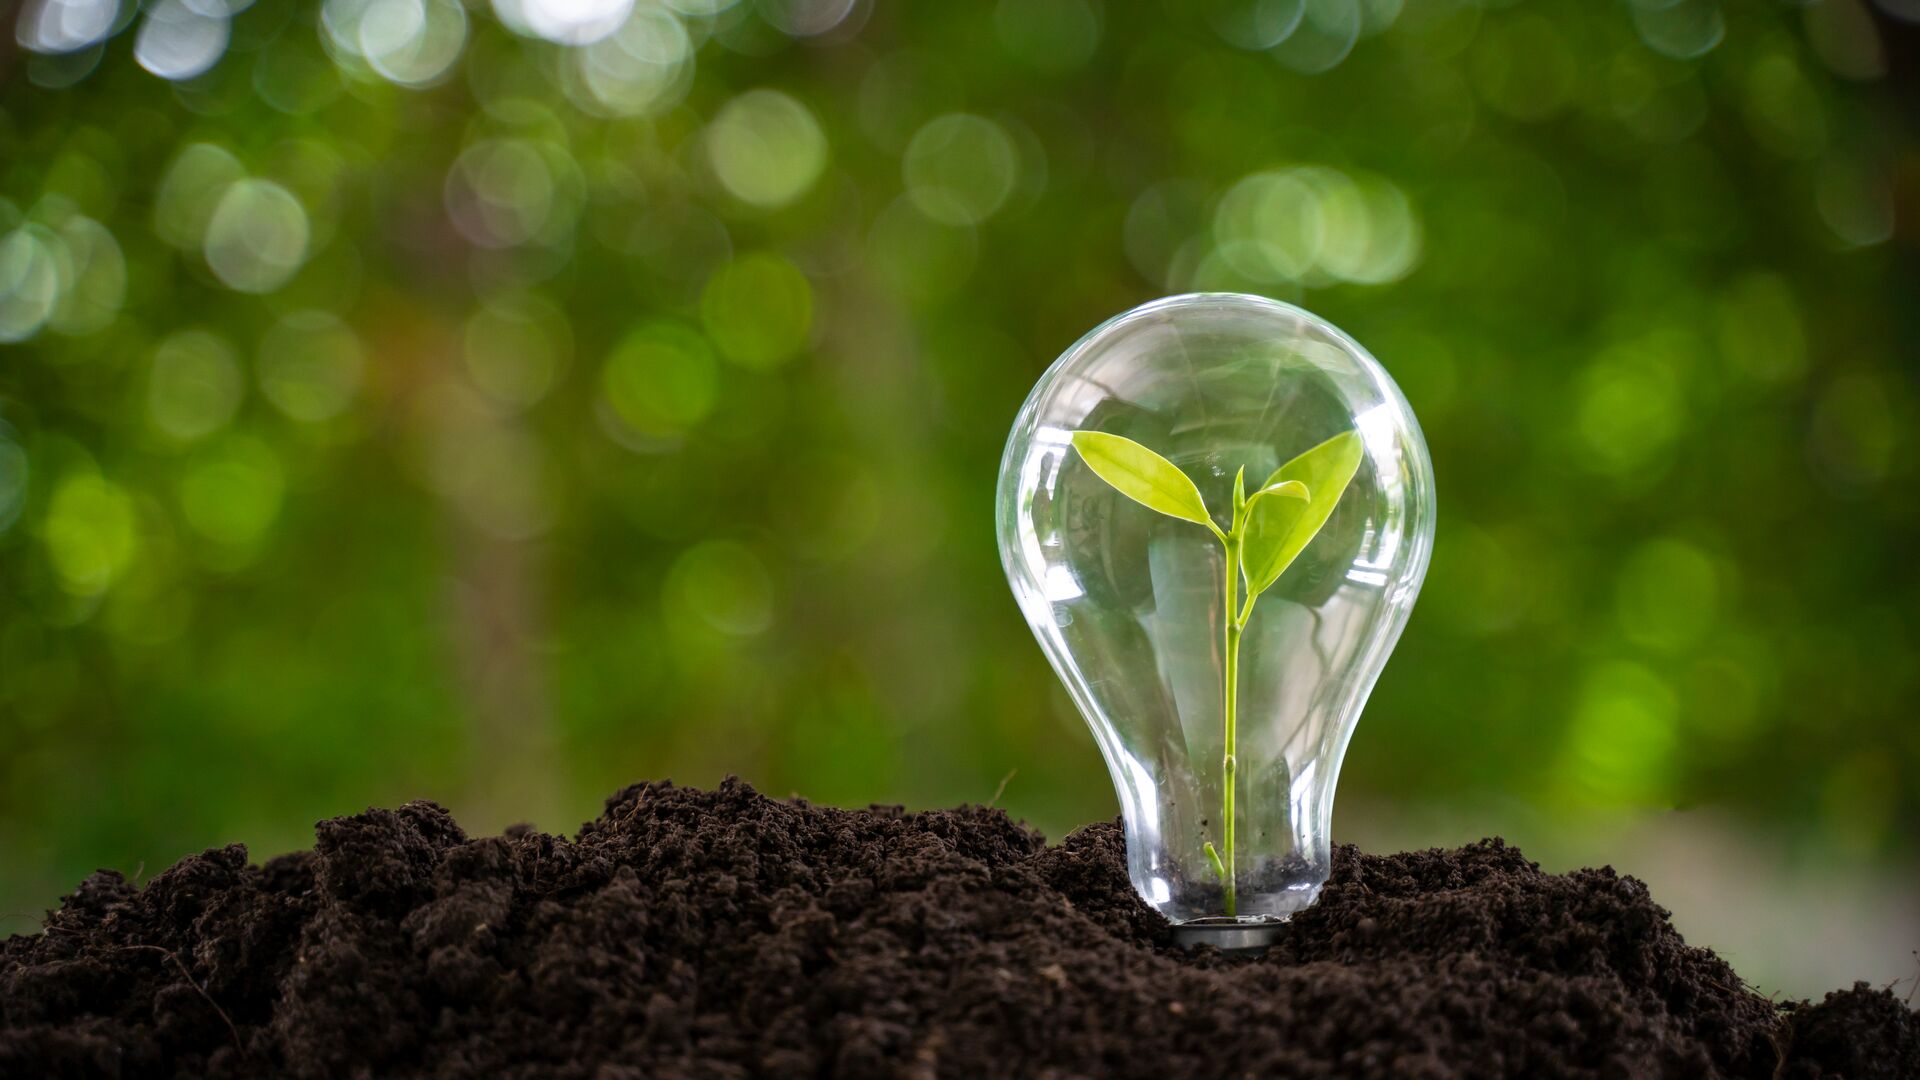 A lightbulb planted in soil with a sprout growing from inside it representing our best ESG investment ideas for 2023.